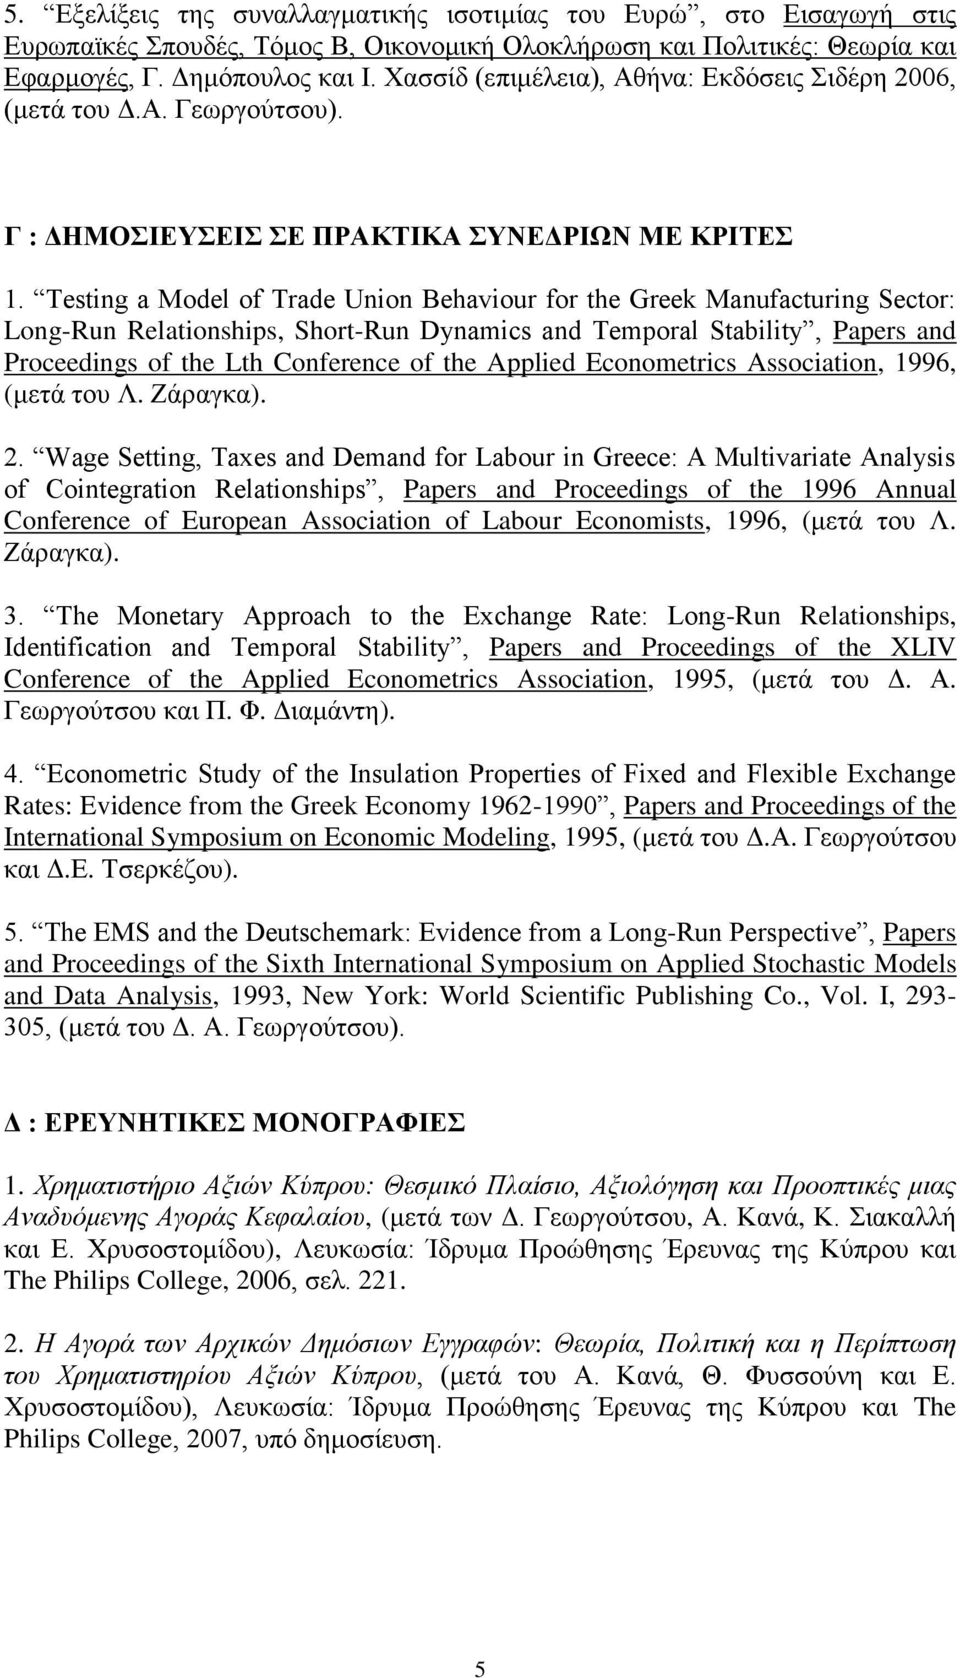 Testing a Model of Trade Union Behaviour for the Greek Manufacturing Sector: Long-Run Relationships, Short-Run Dynamics and Temporal Stability, Papers and Proceedings of the Lth Conference of the